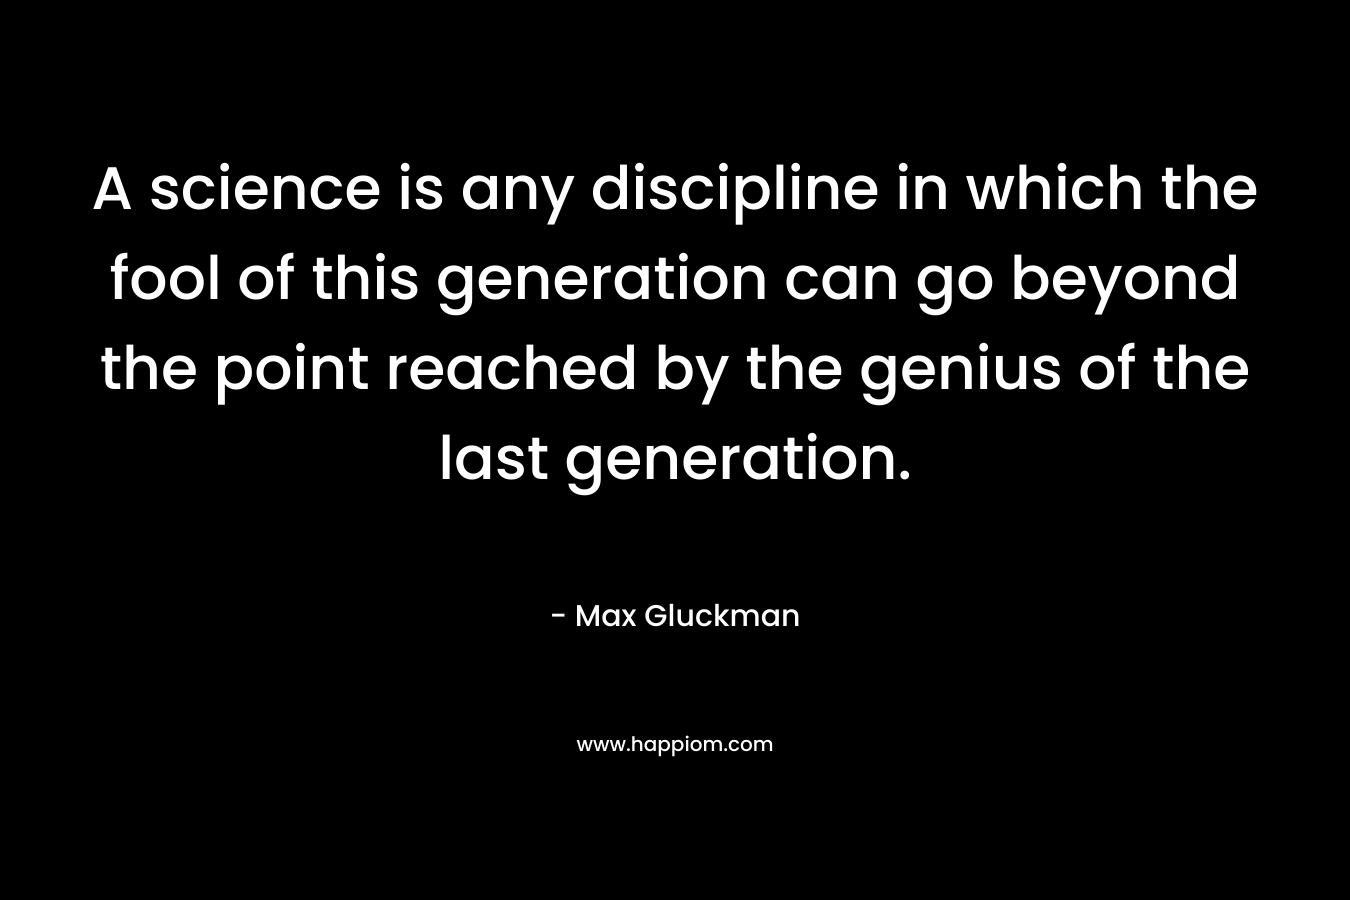 A science is any discipline in which the fool of this generation can go beyond the point reached by the genius of the last generation.